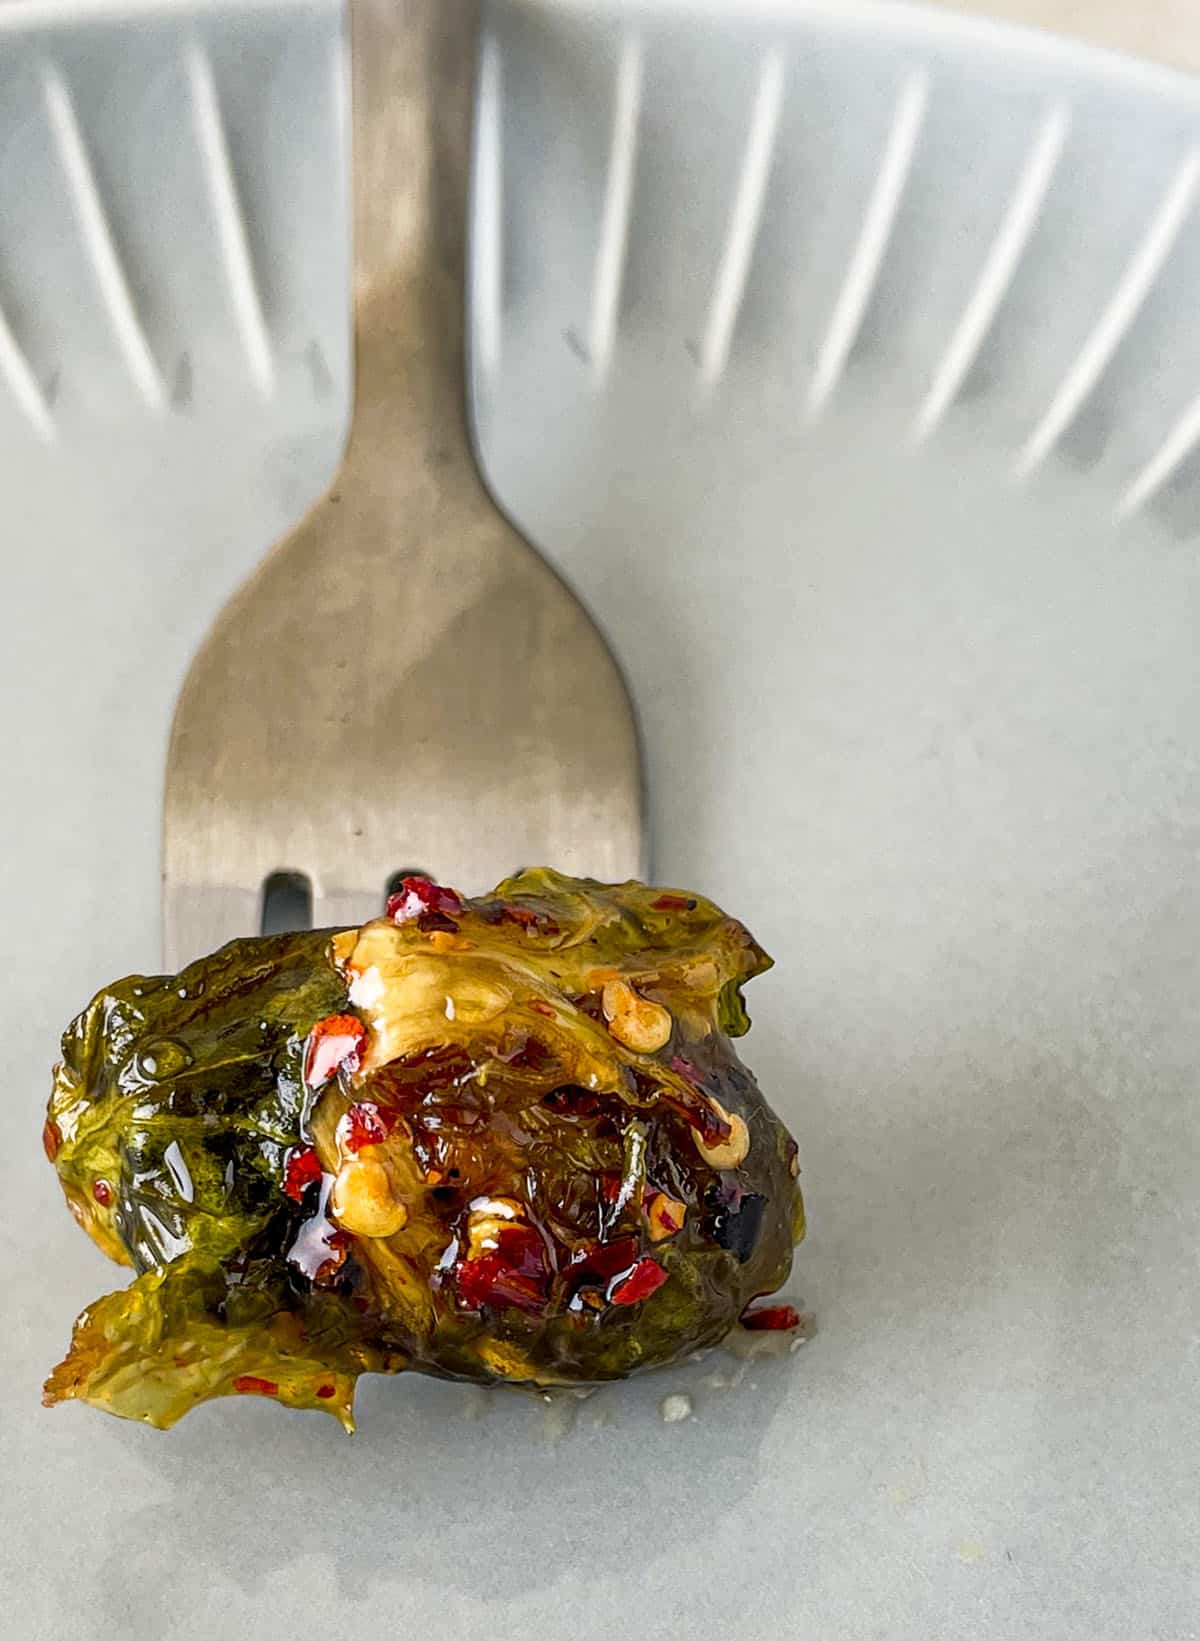 A fork with one roasted brussels sprout on it.